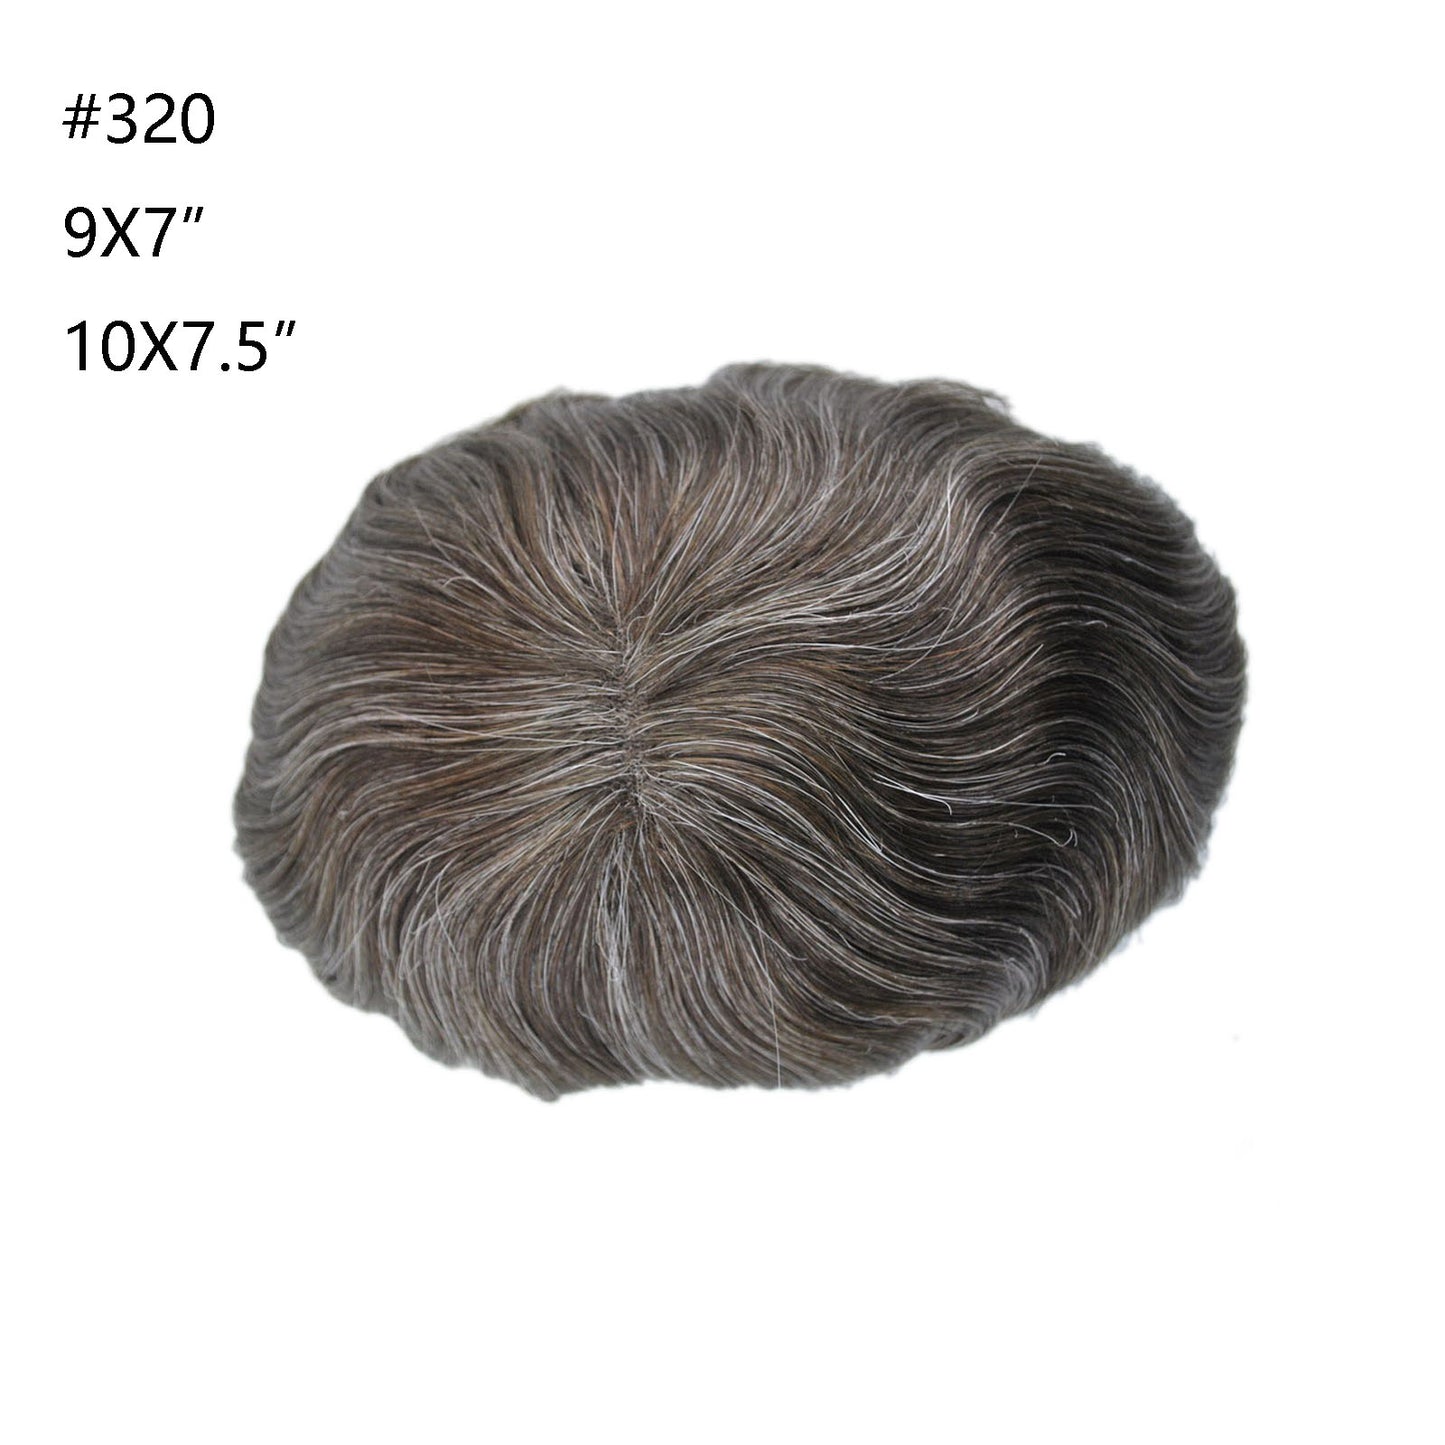 Swiss Lace Ash Brown #320 Toupee For Men With Grey Hair Durable Lace Hair System Men Wig